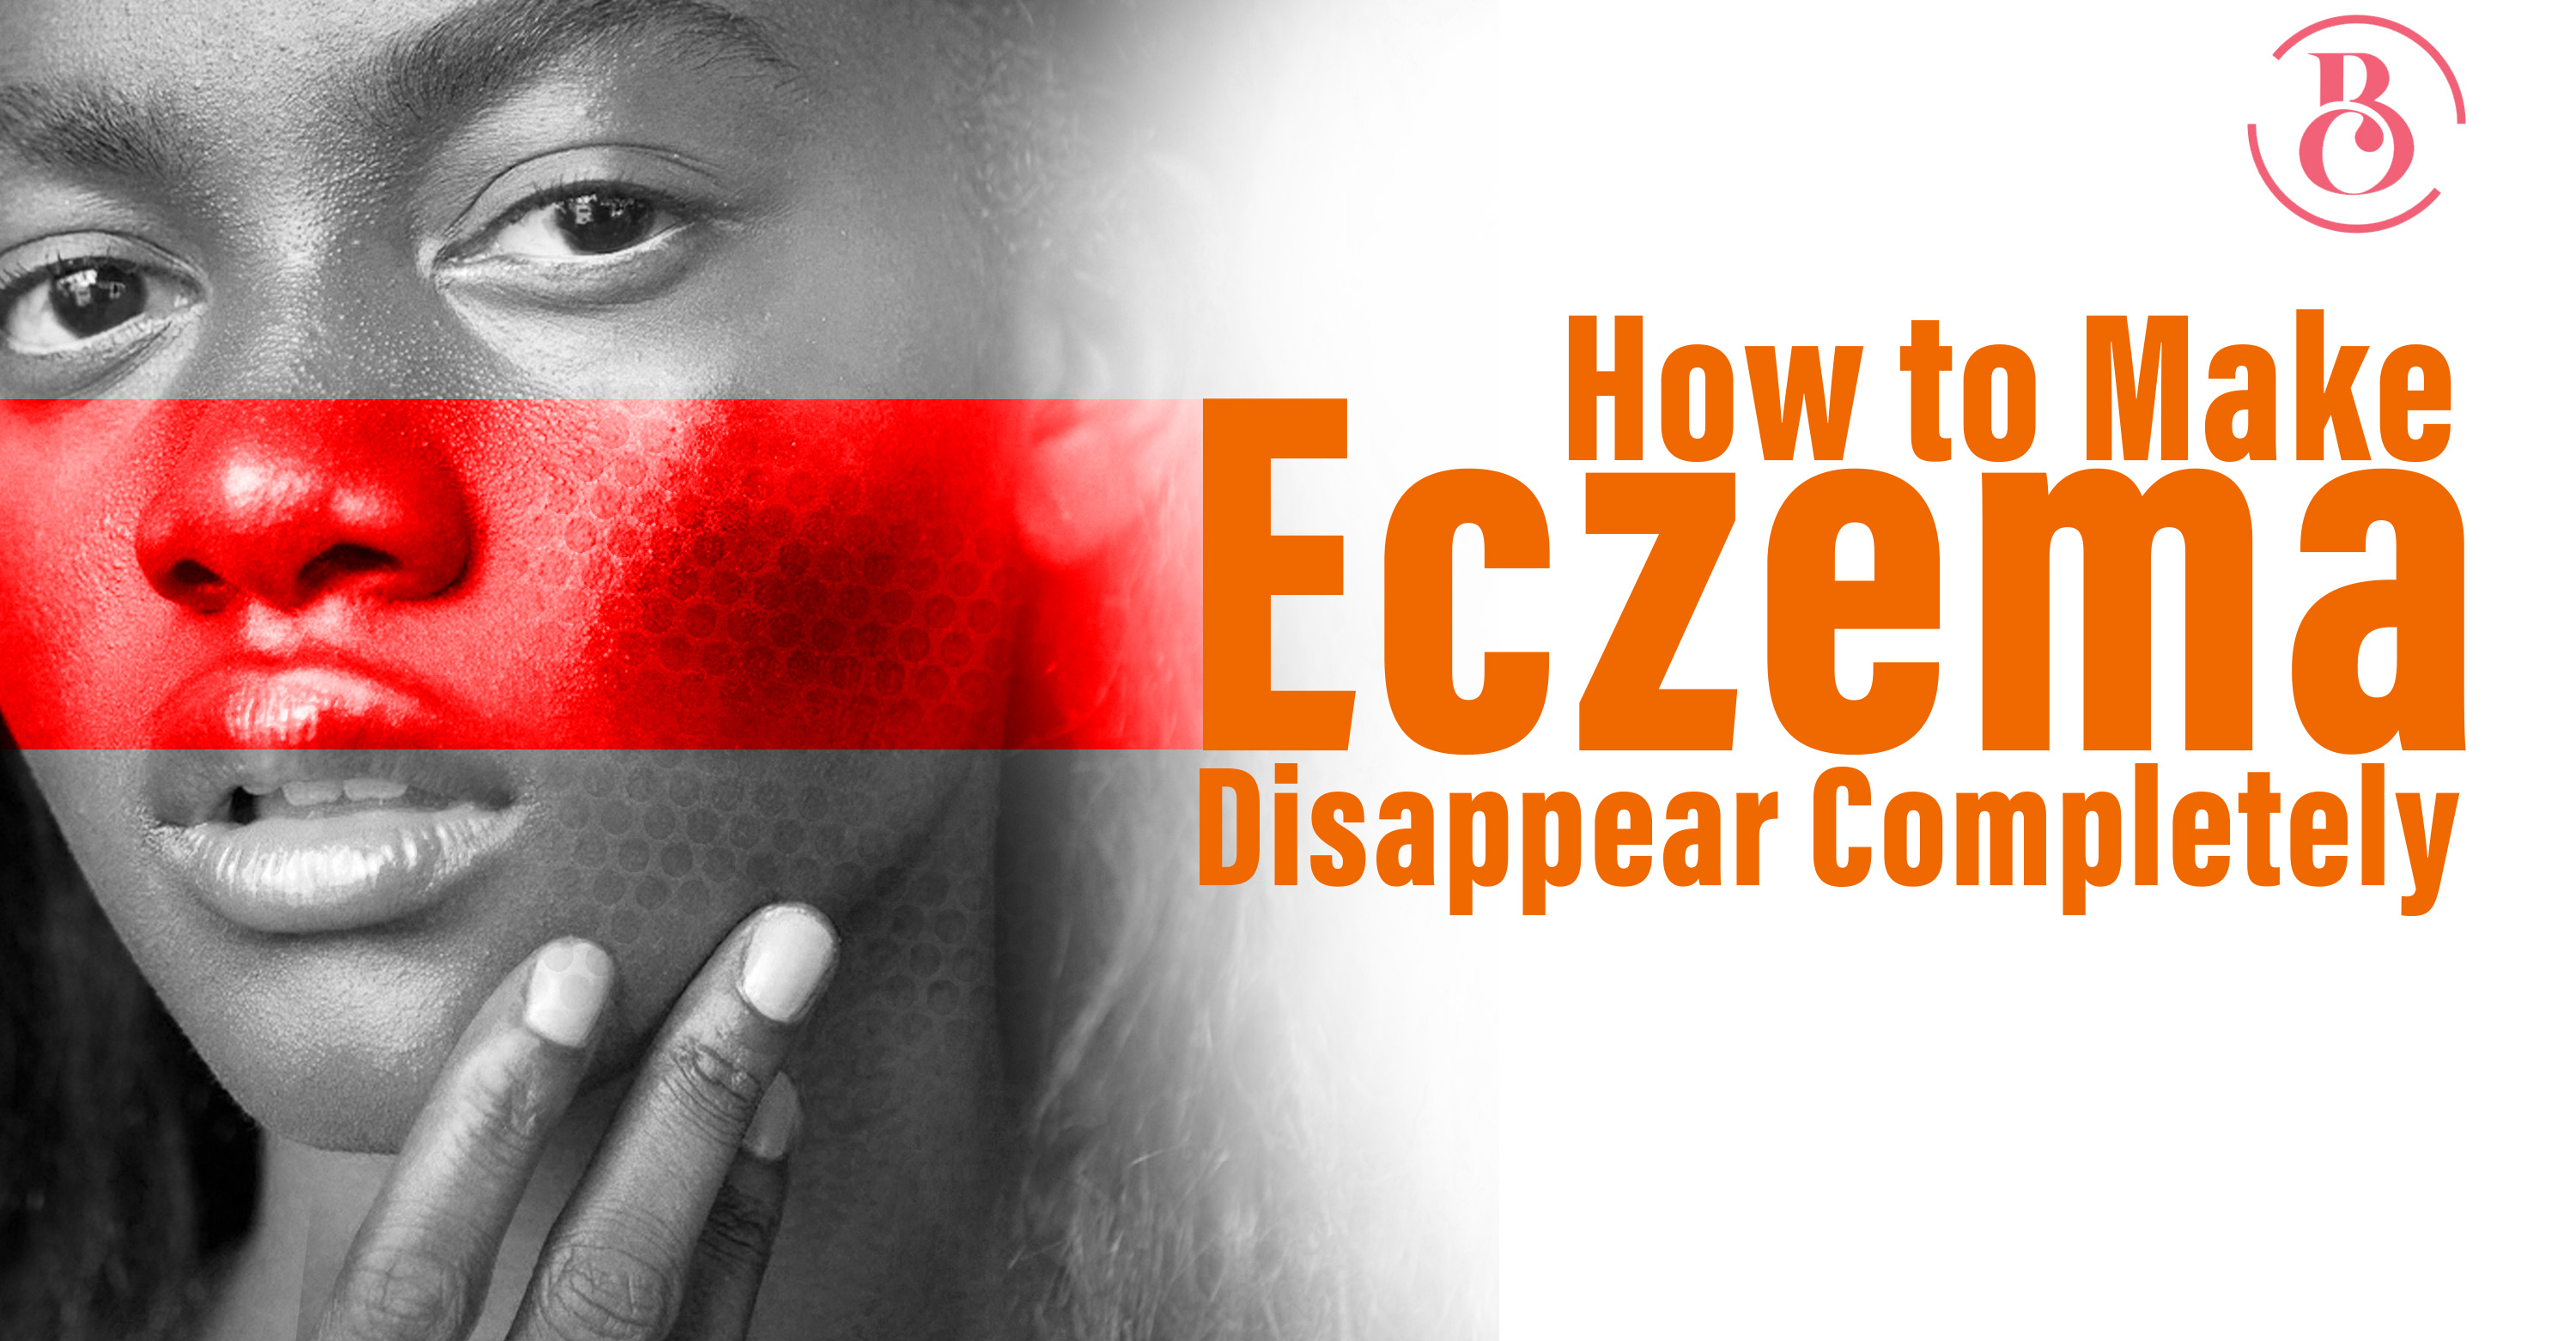 How to Make Eczema Disappear Completely